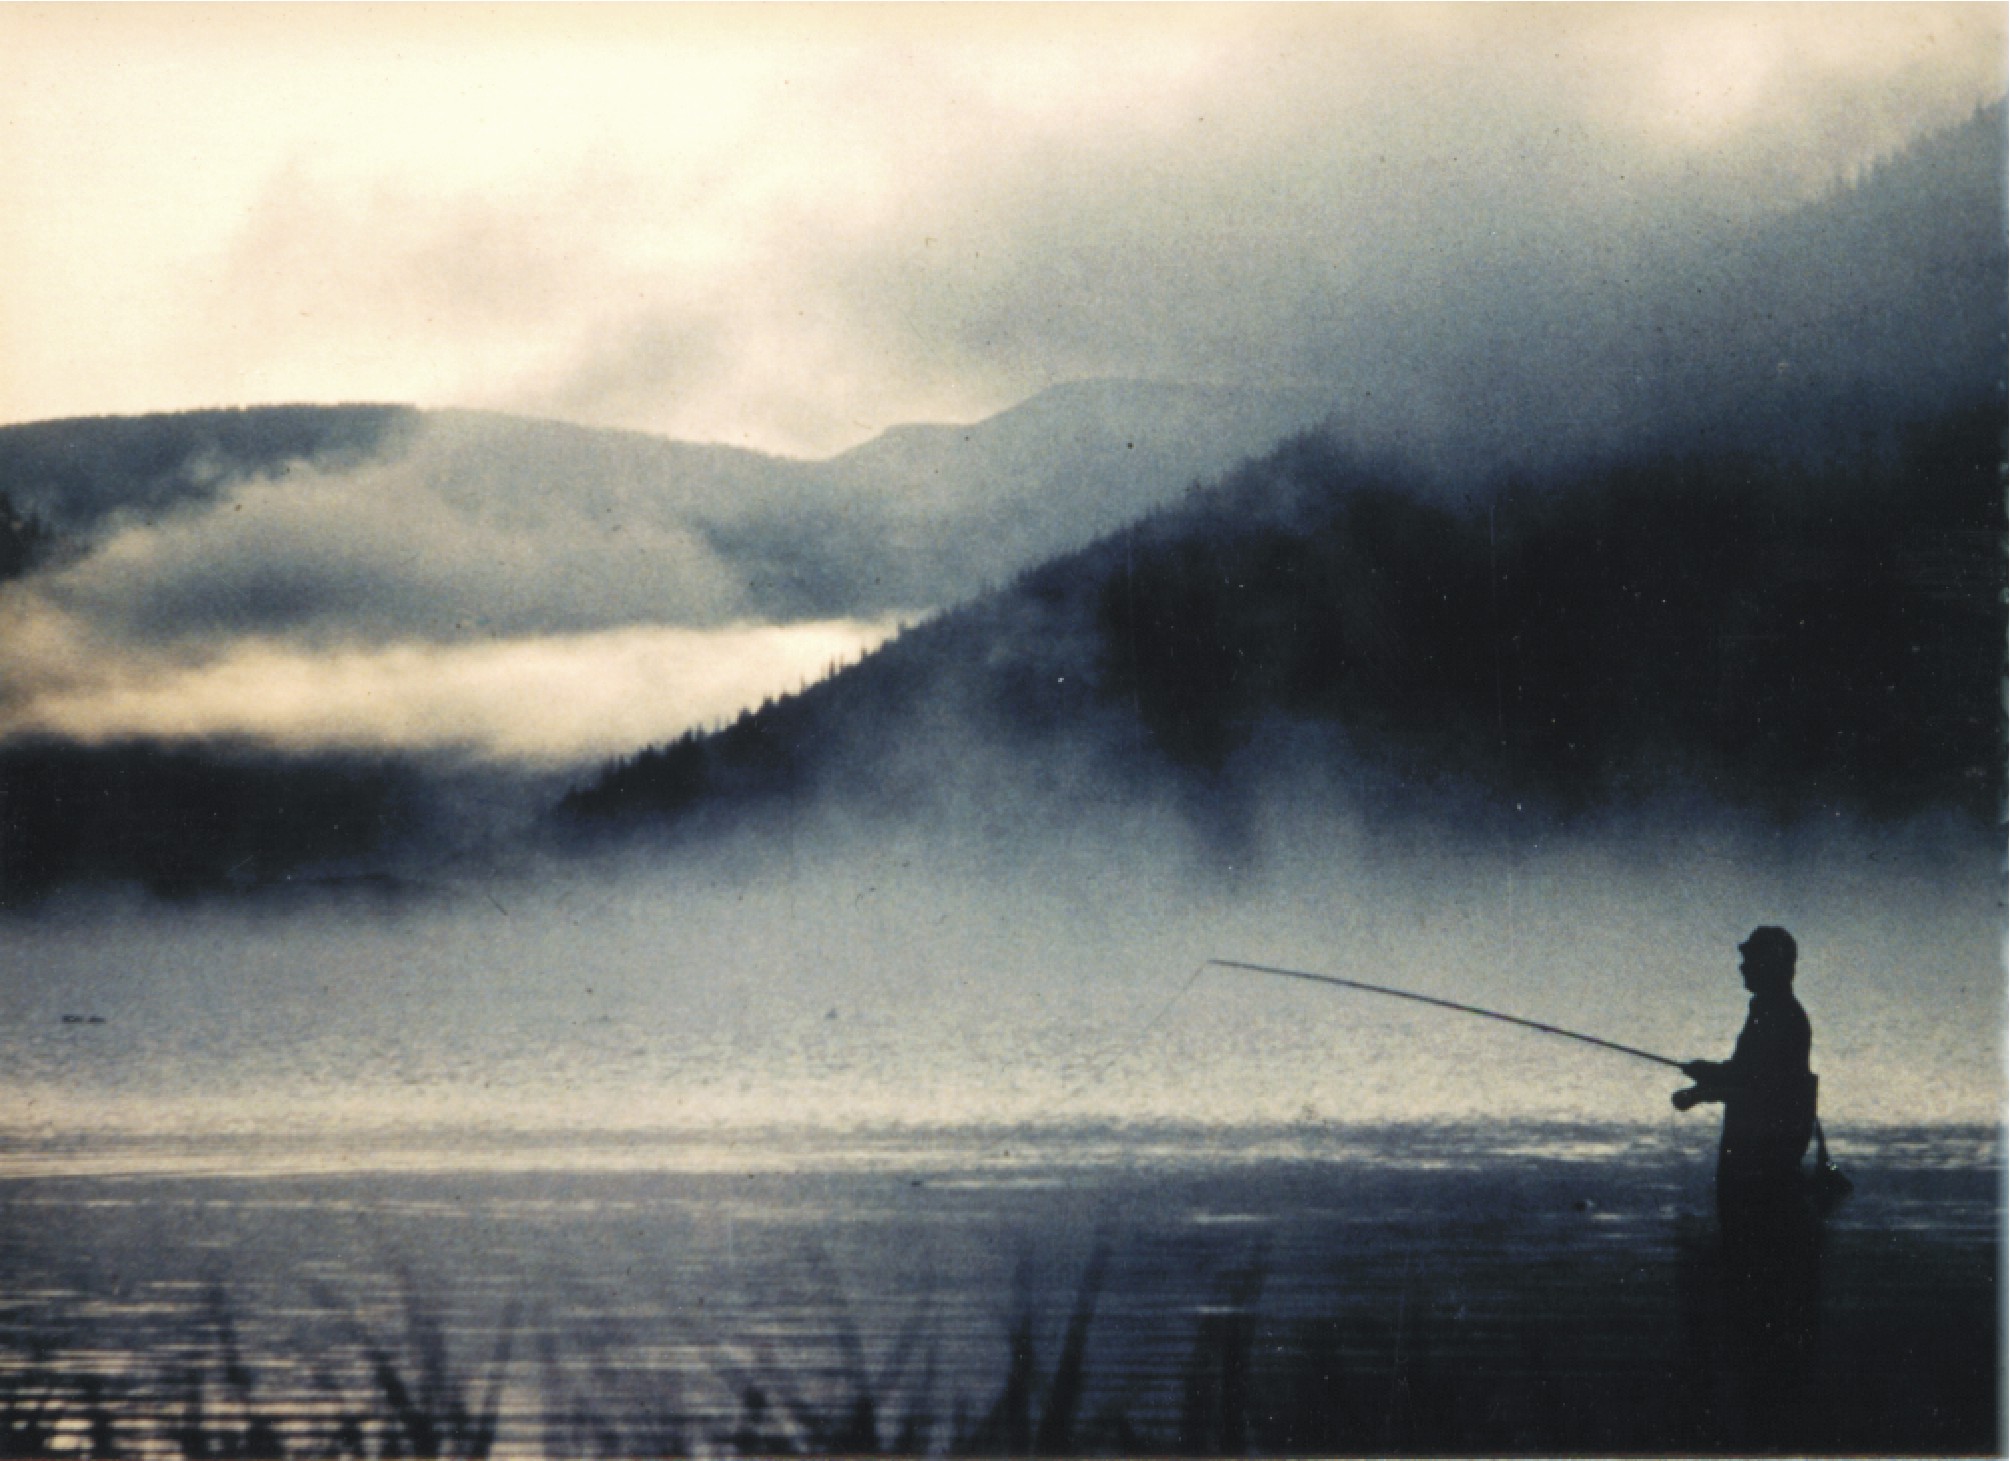 Fly fishing in the fog of Yampa River